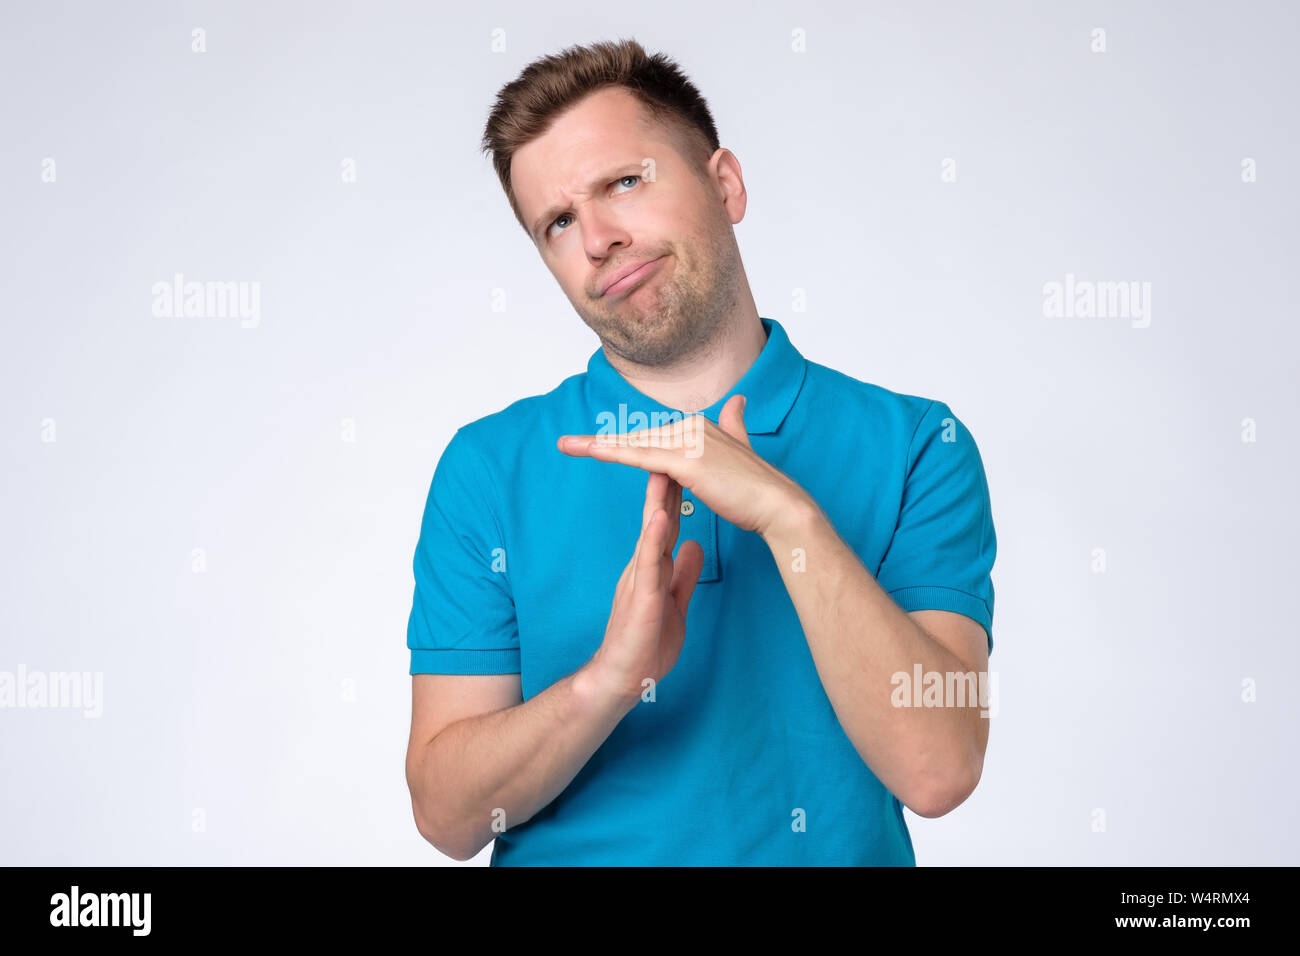 Man making time out gesture over grey background Stock Photo